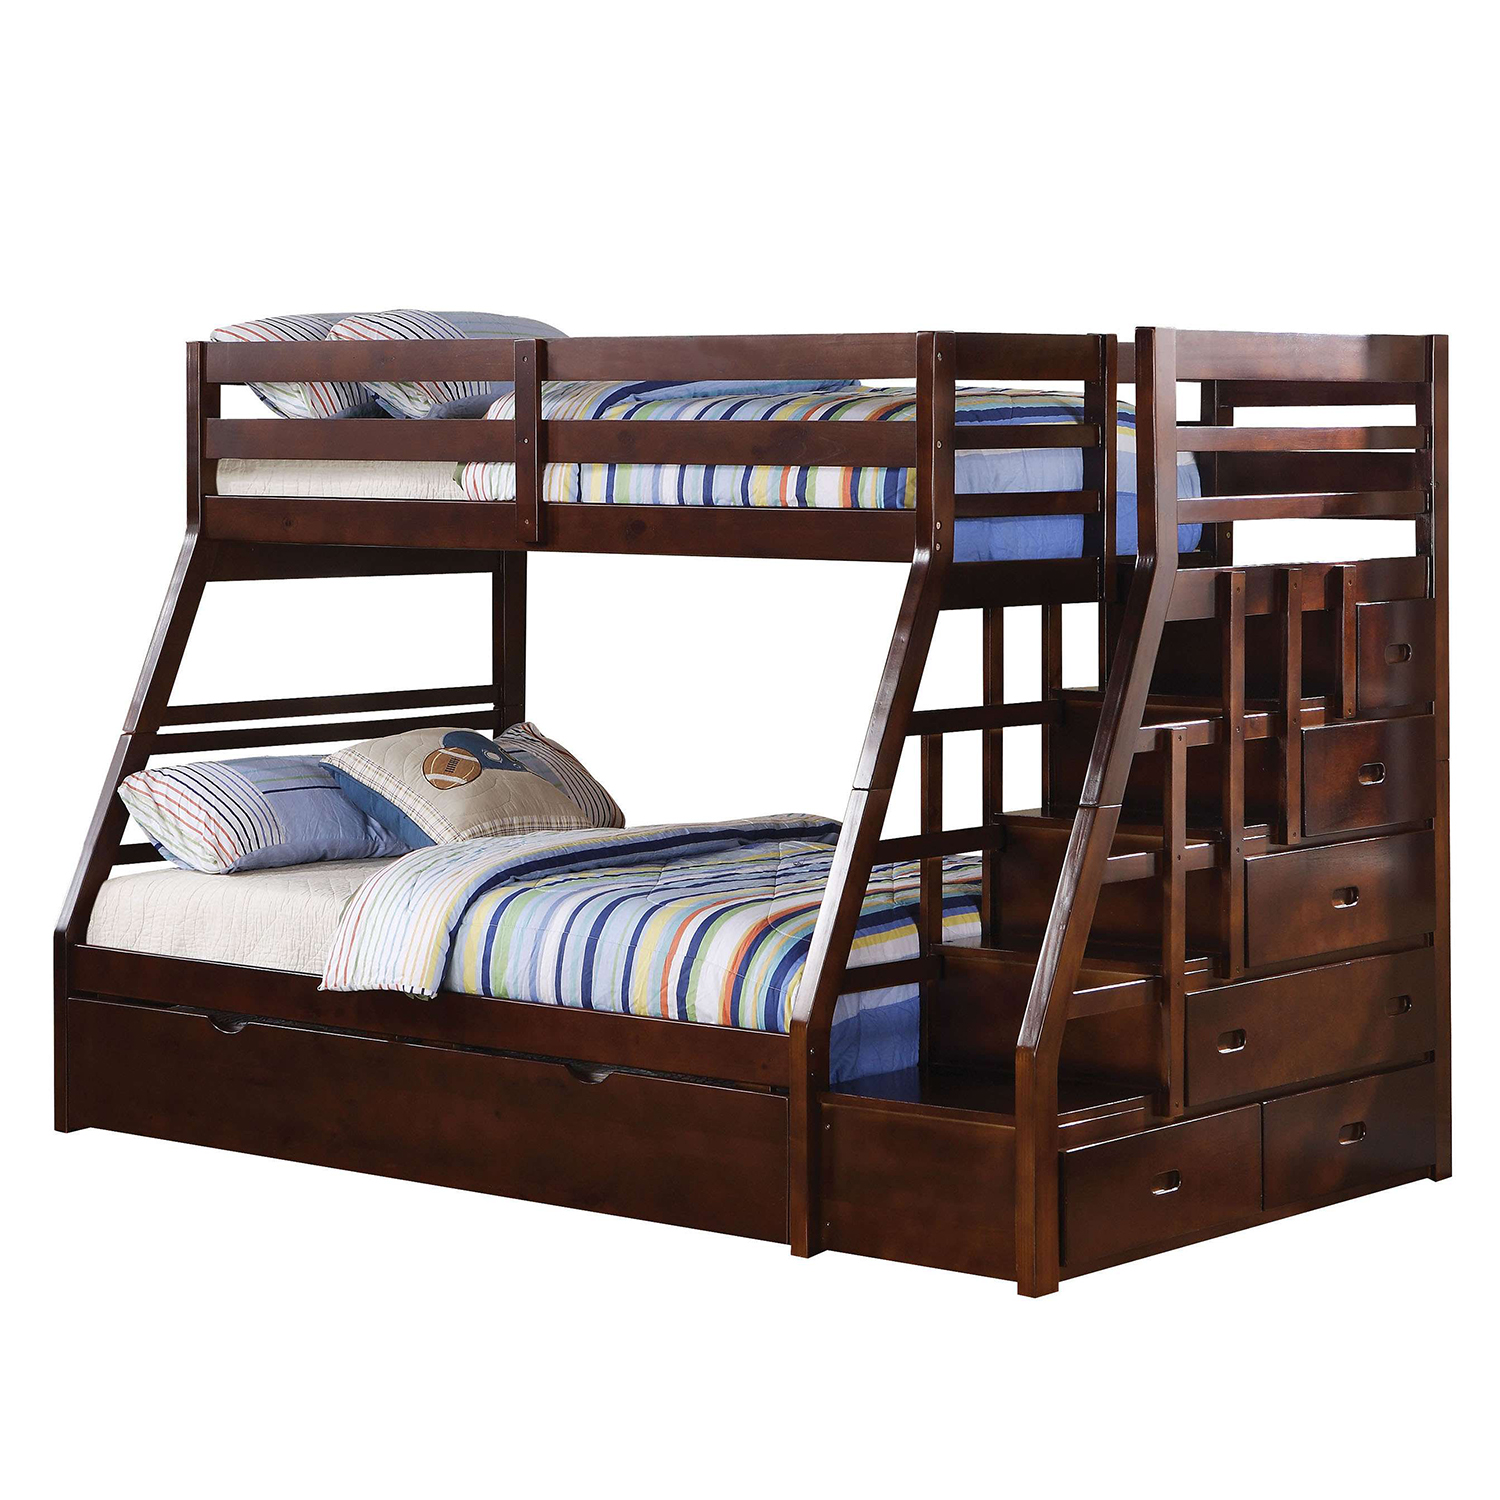 98" X 56" X 65" Espresso Pine Wood Bunk Bed (Twin/Full) with Trundle